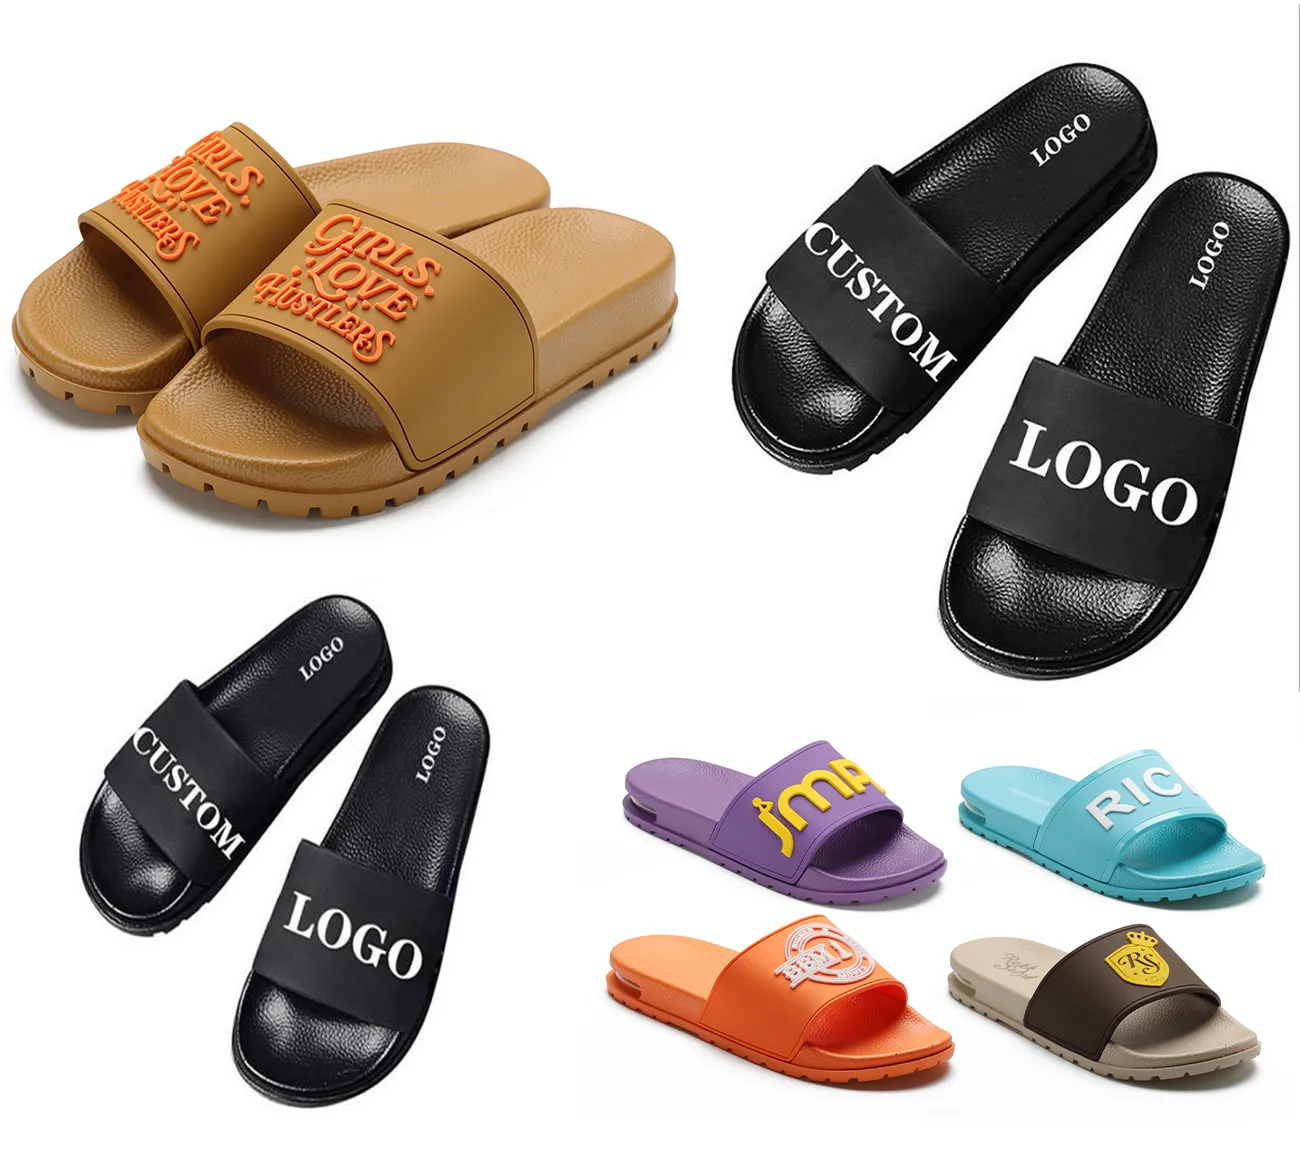 Henghao High Quality Thick Sole Customized Slide Sandals Outdoor Comfortable Outdoor Women Men Bathroom Slides Slipper Sandal